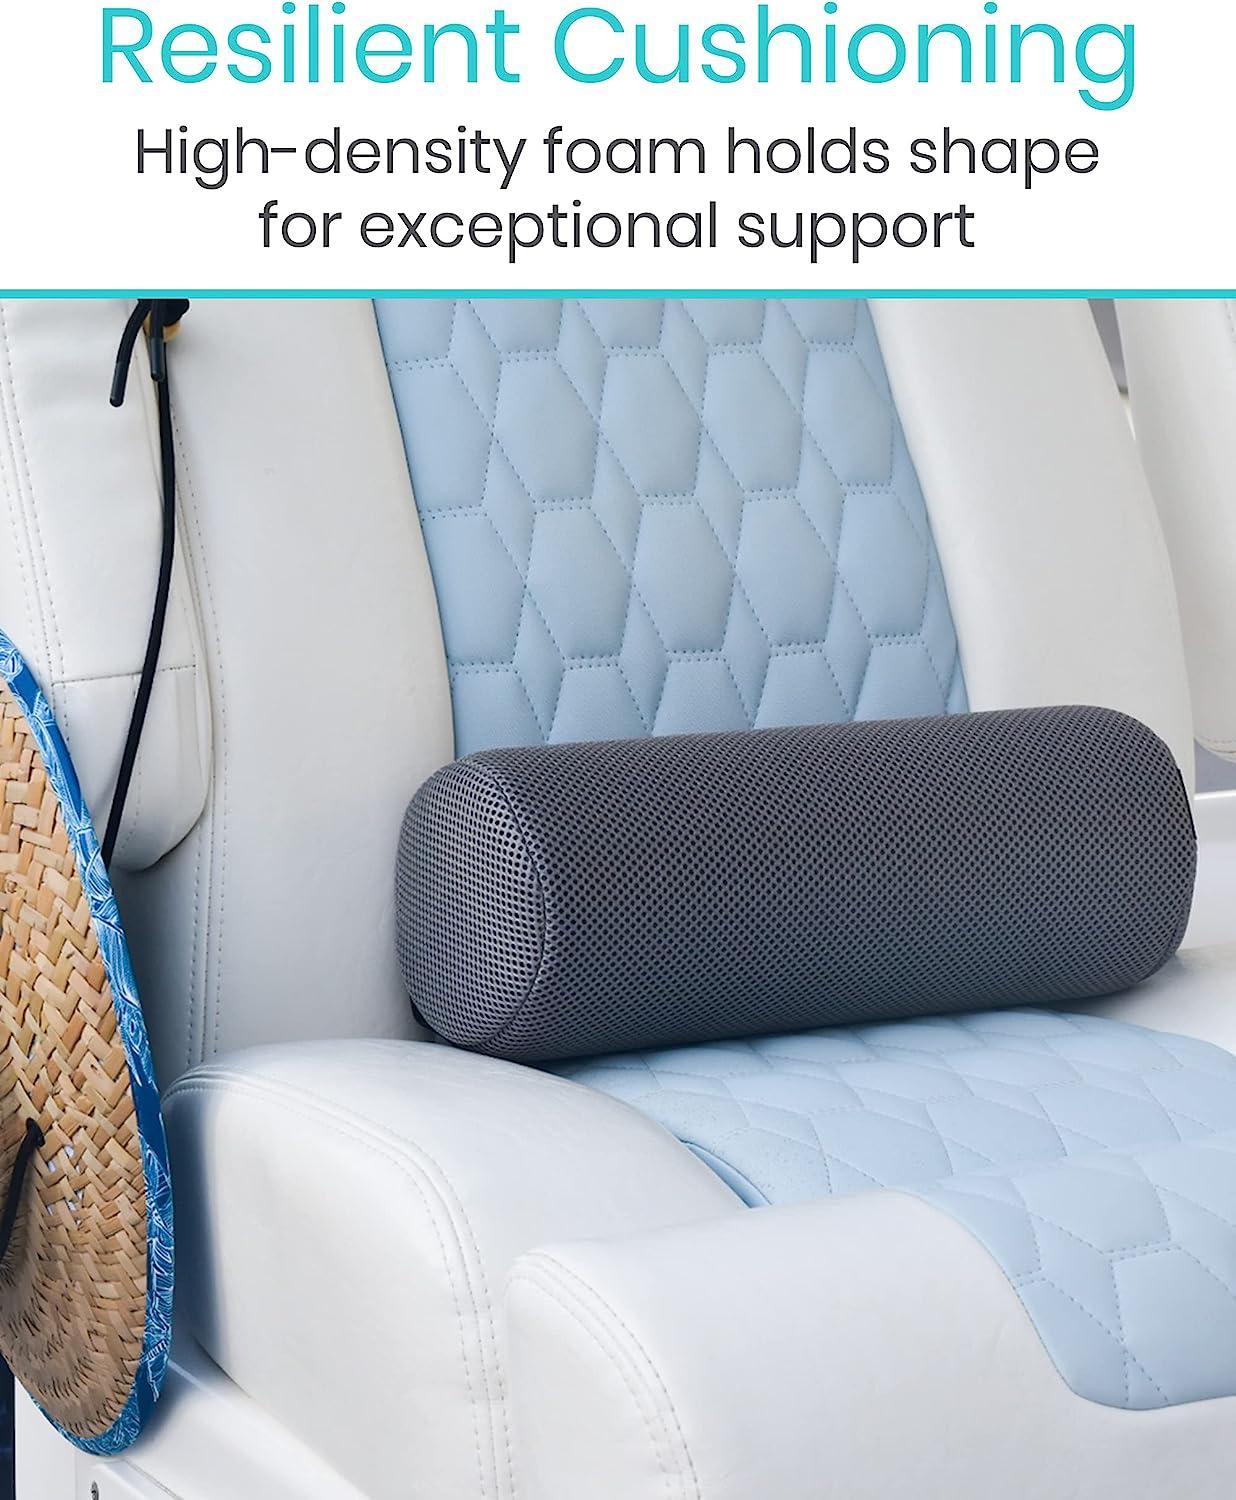 Car Seat Lumbar Back Support Cushion for Office Chair Posture Corrector  Mesh